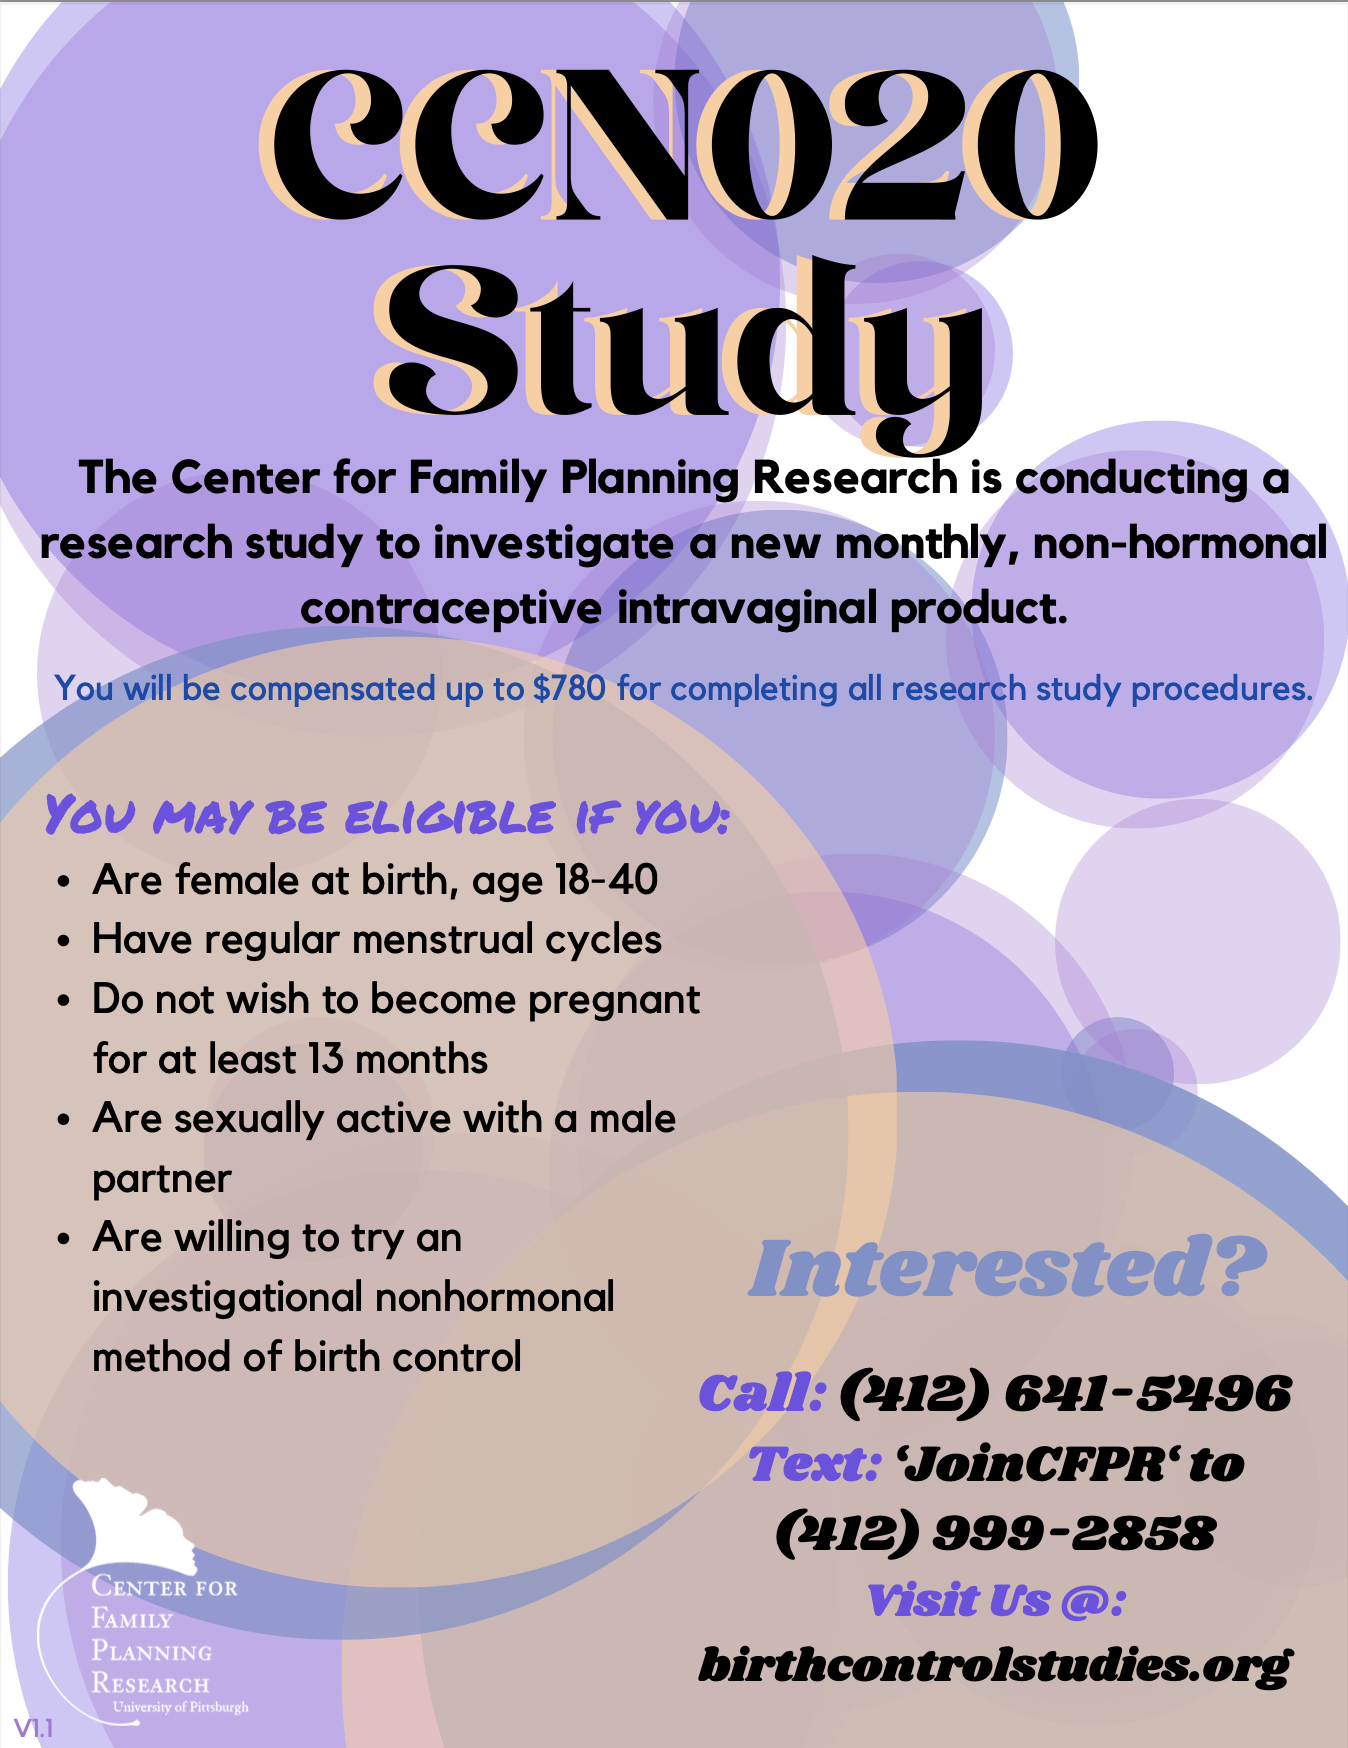 Center for Family Planning Research Recruitment